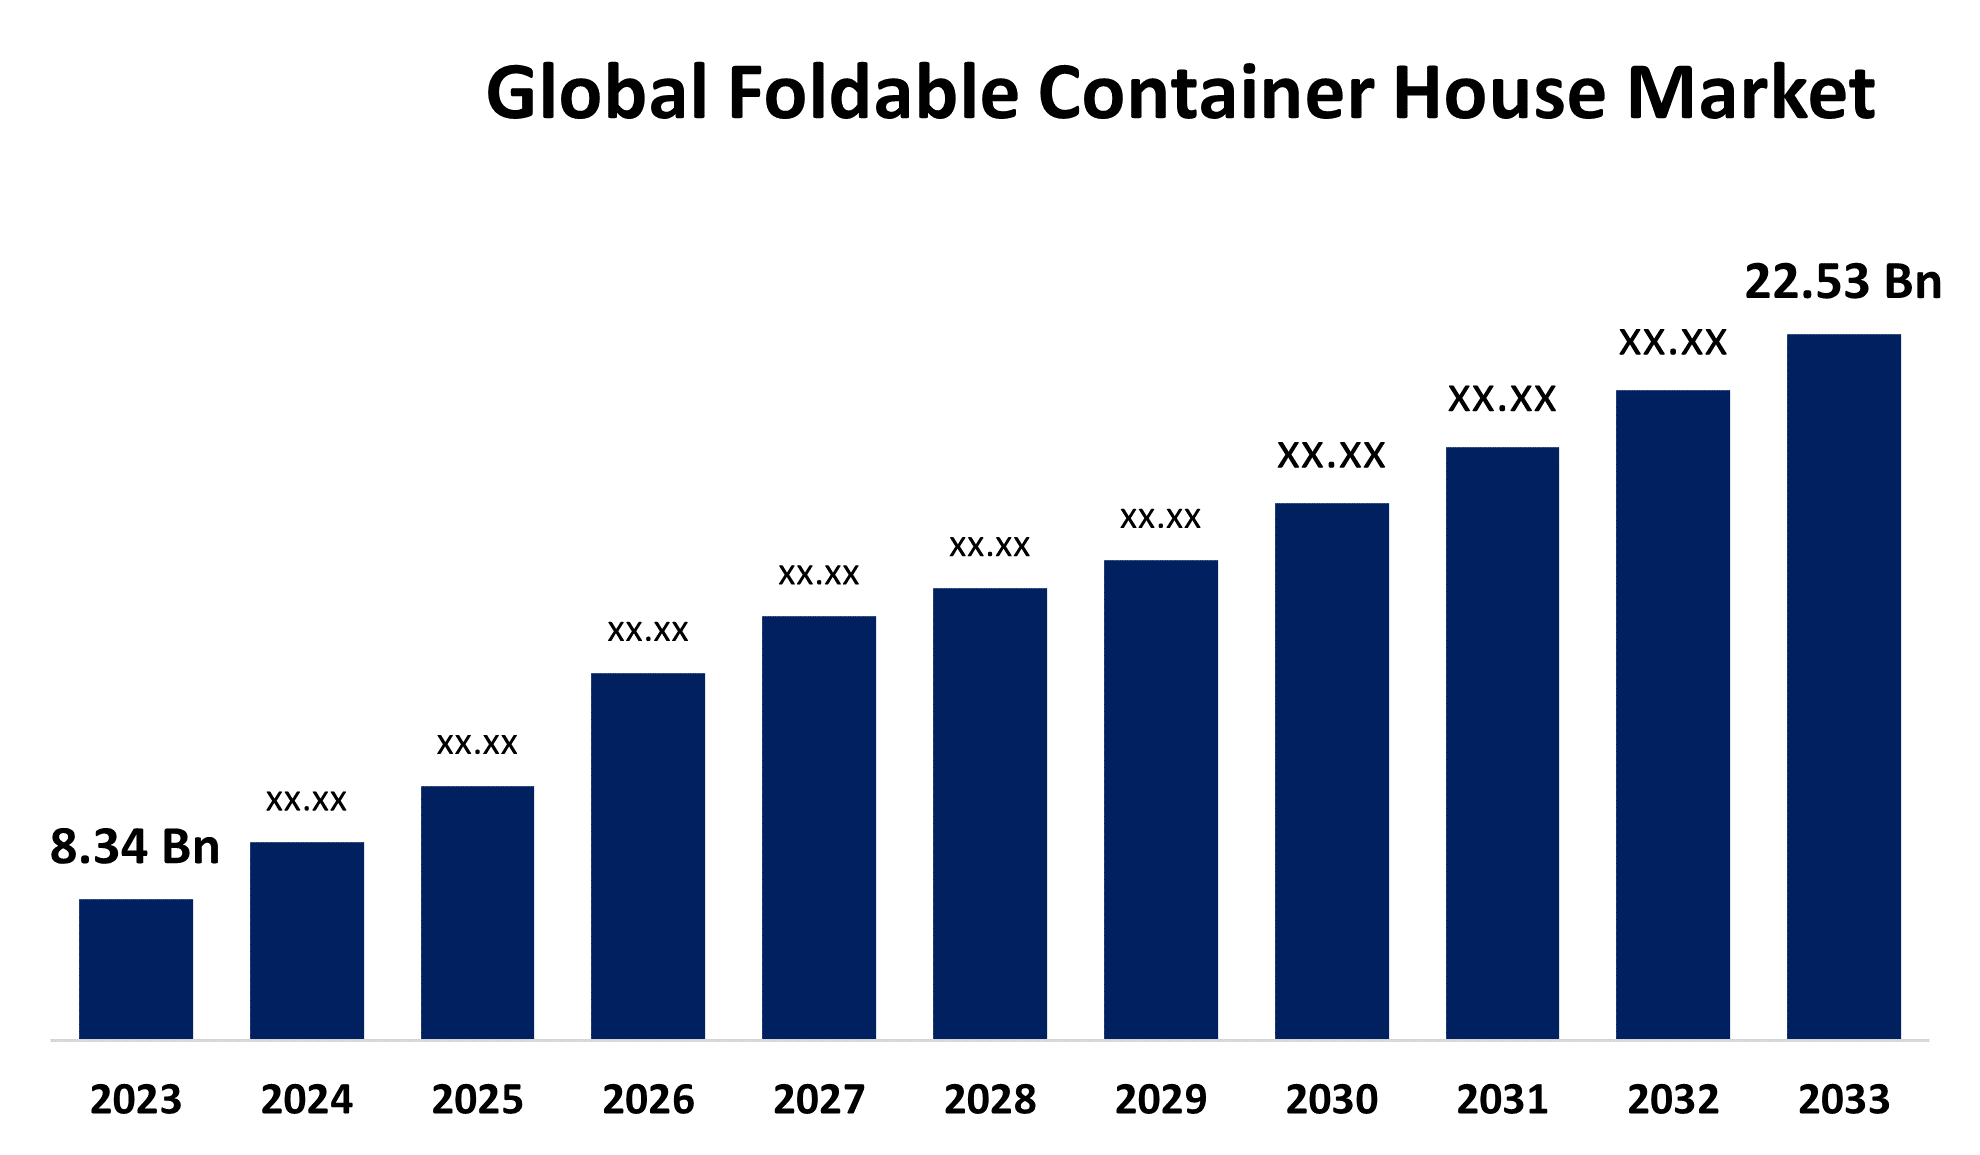 Global Foldable Container House Market